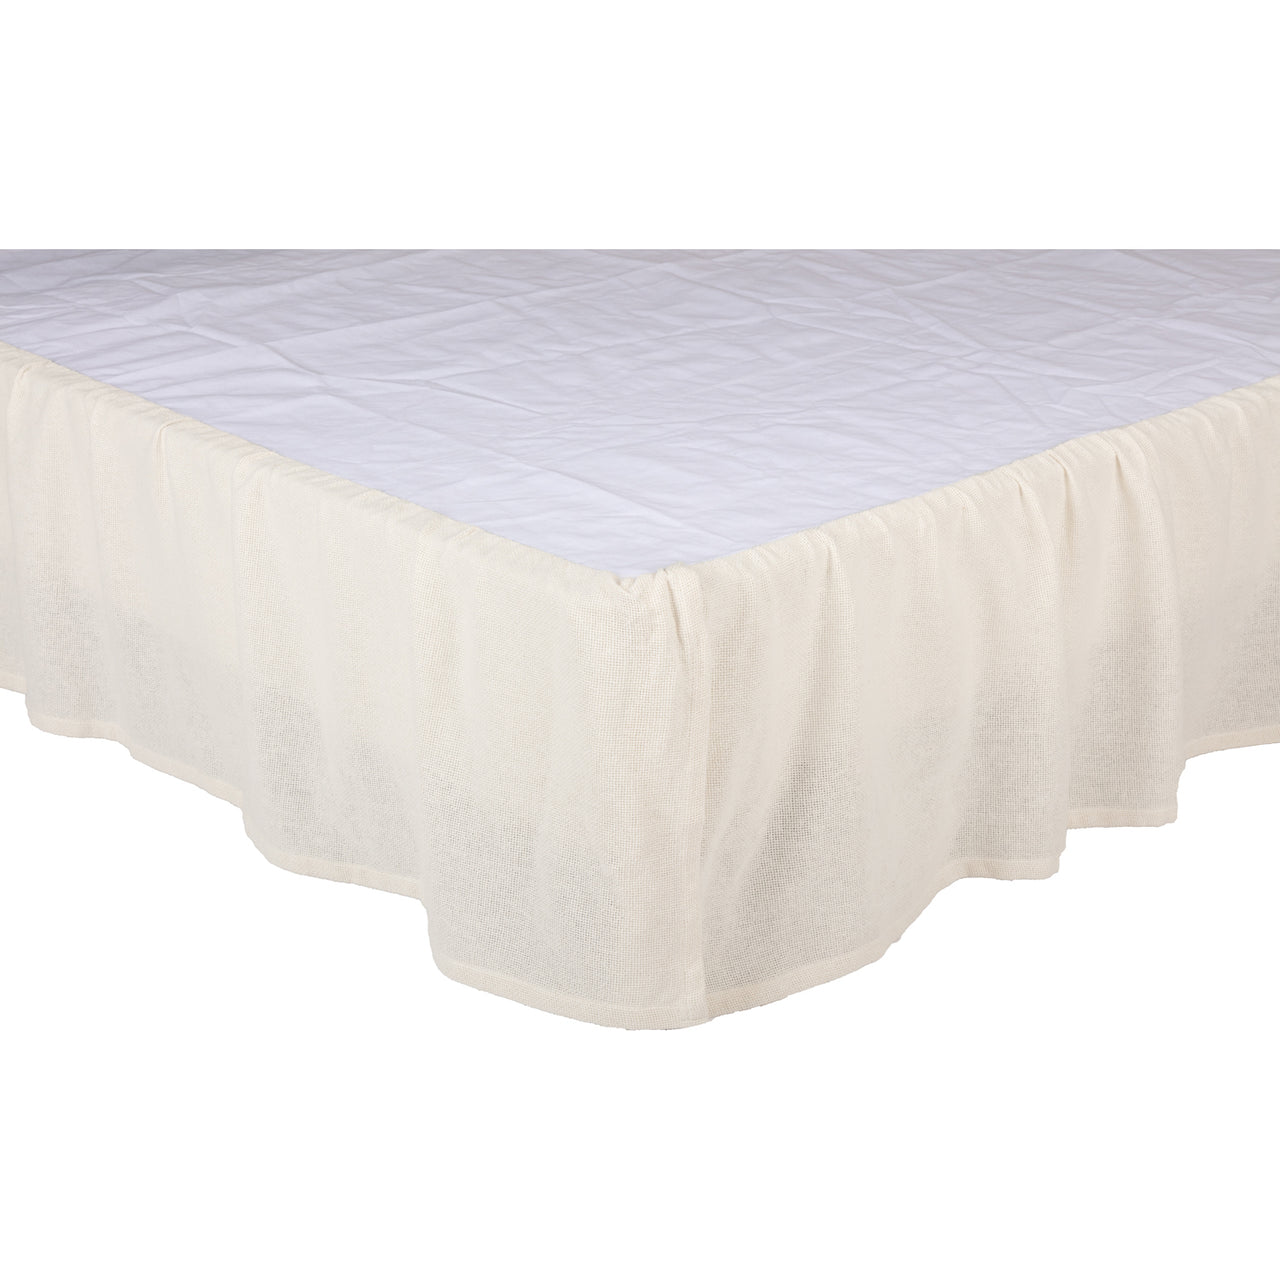 Burlap Antique White Ruffled Twin Bed Skirt 39x76x16 VHC Brands